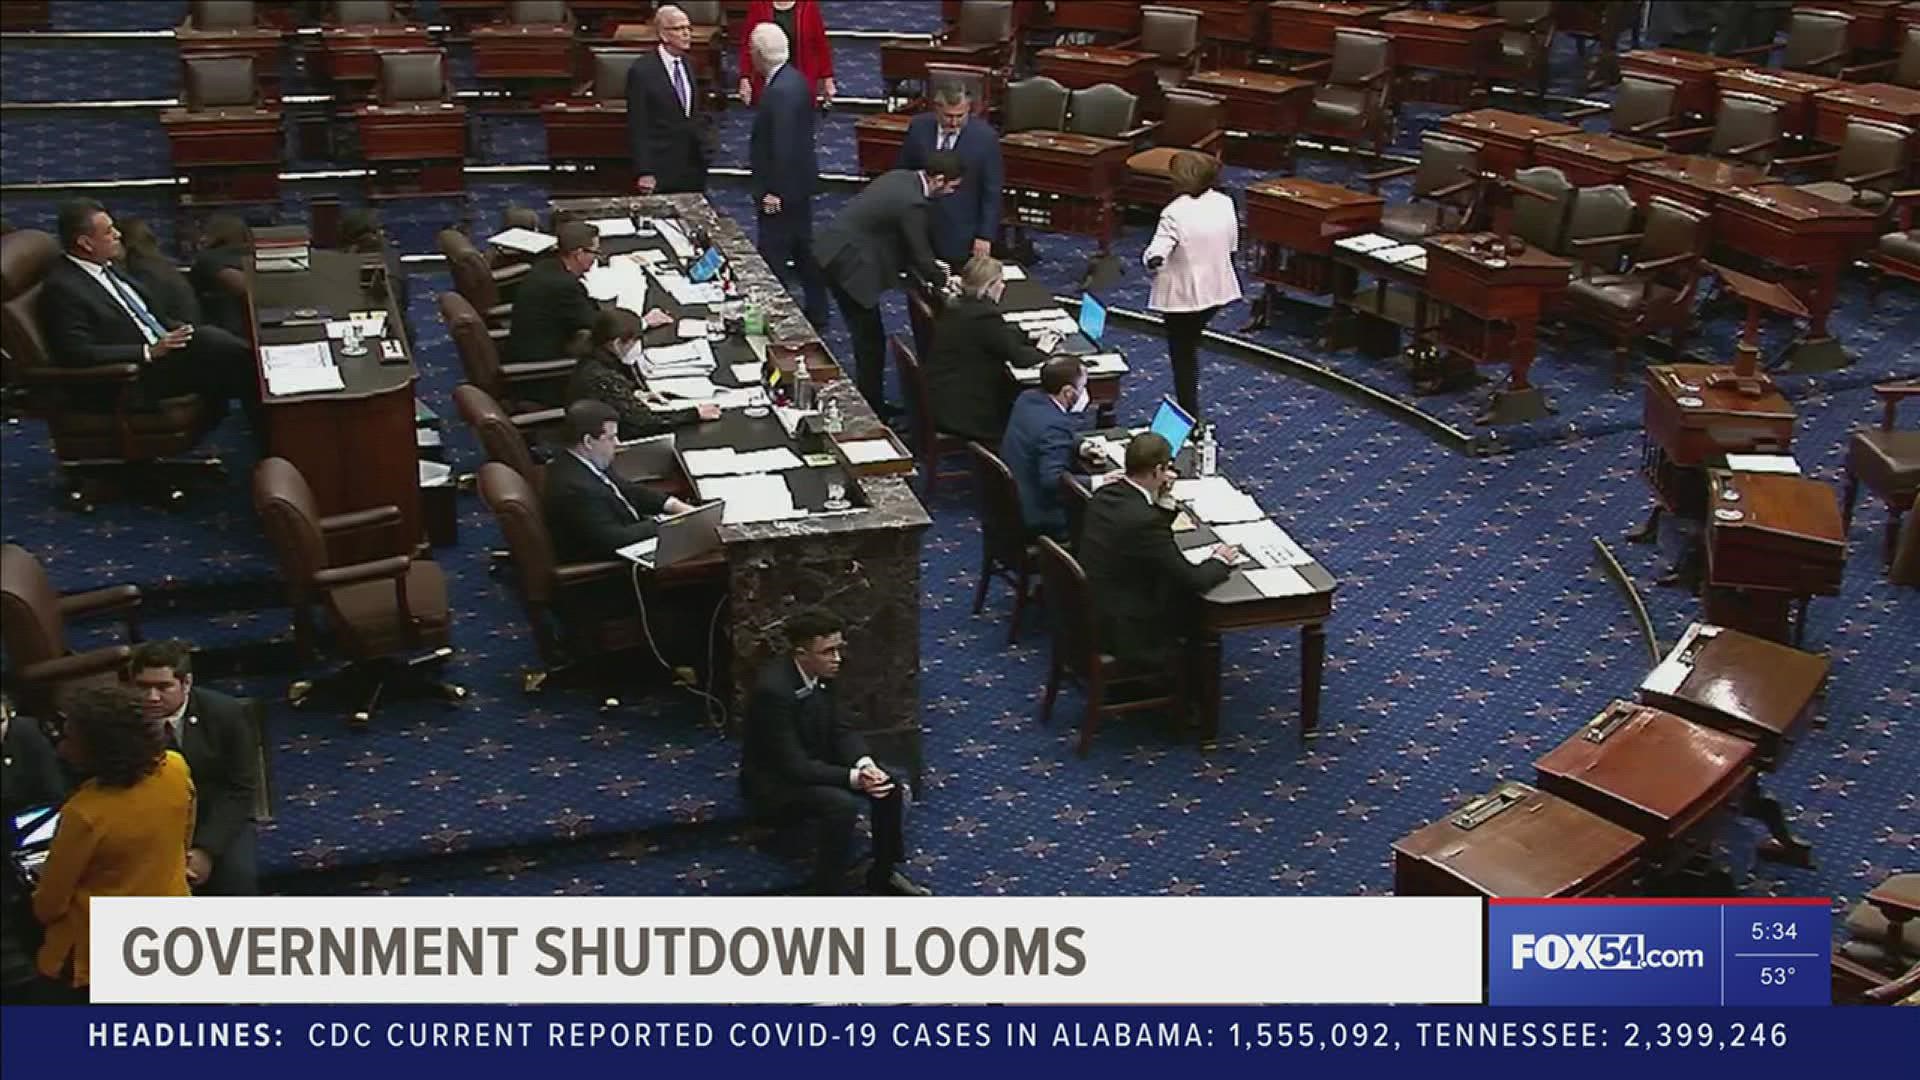 Congress has until Friday, December 16, 2022 to decide on a deal to avoid a government shut down.